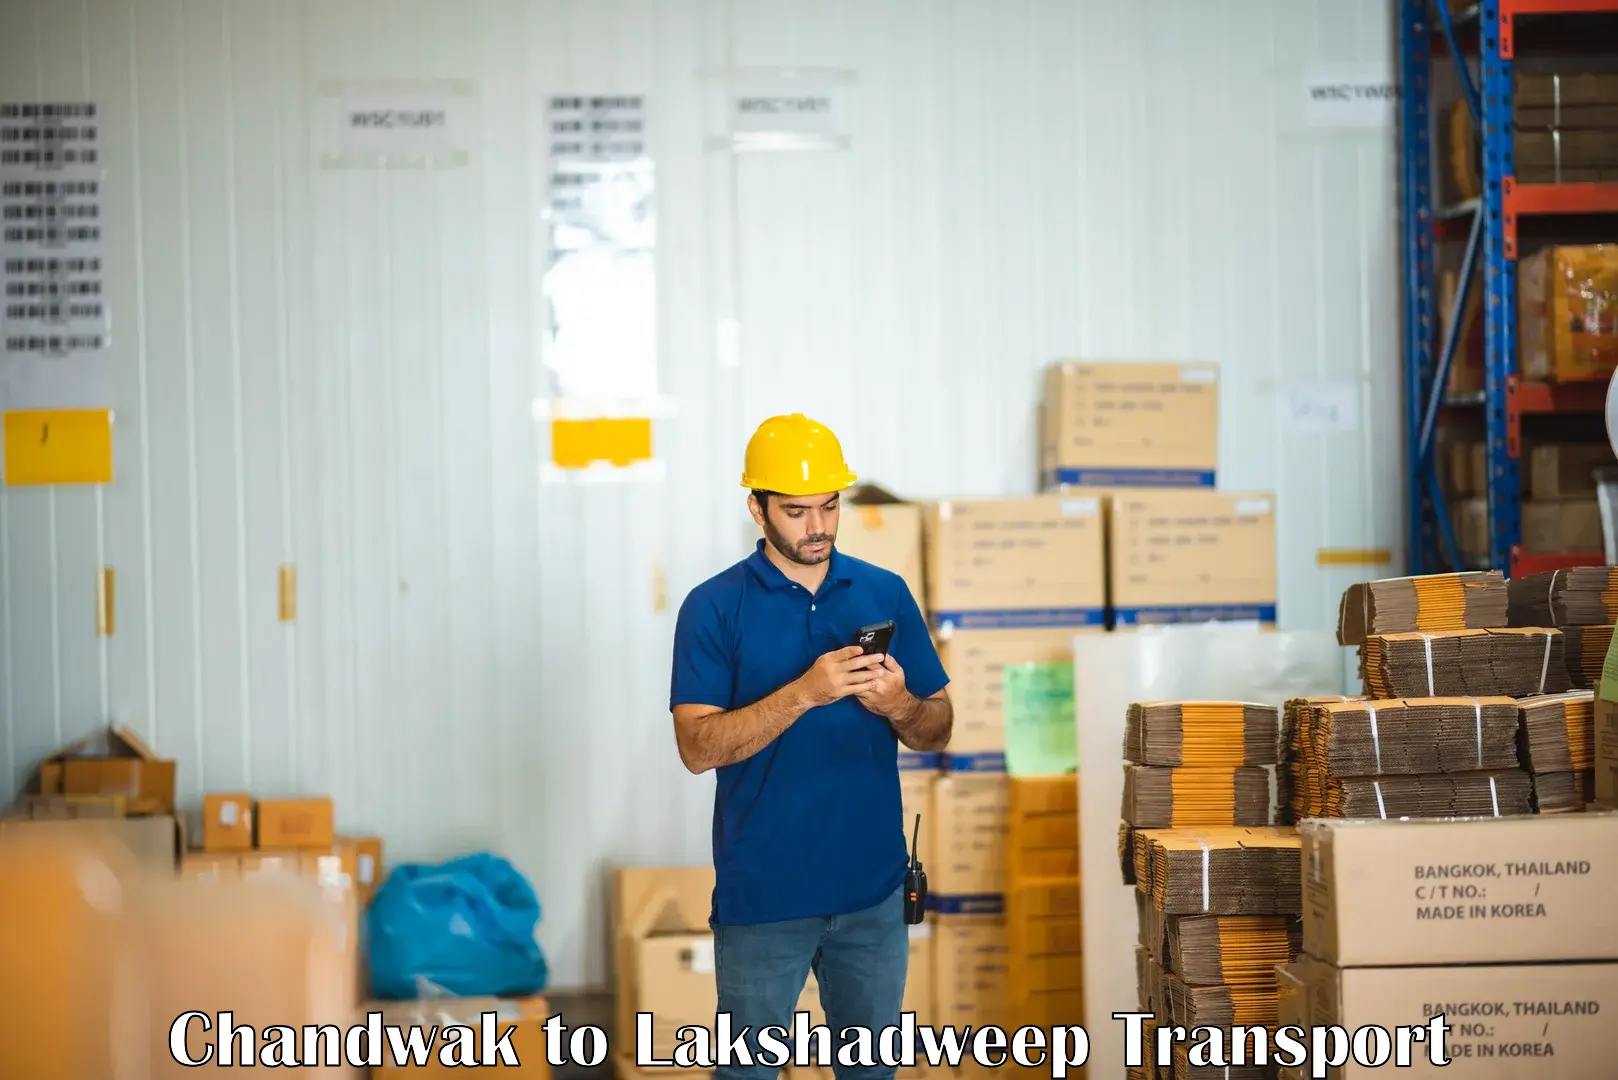 Material transport services Chandwak to Lakshadweep